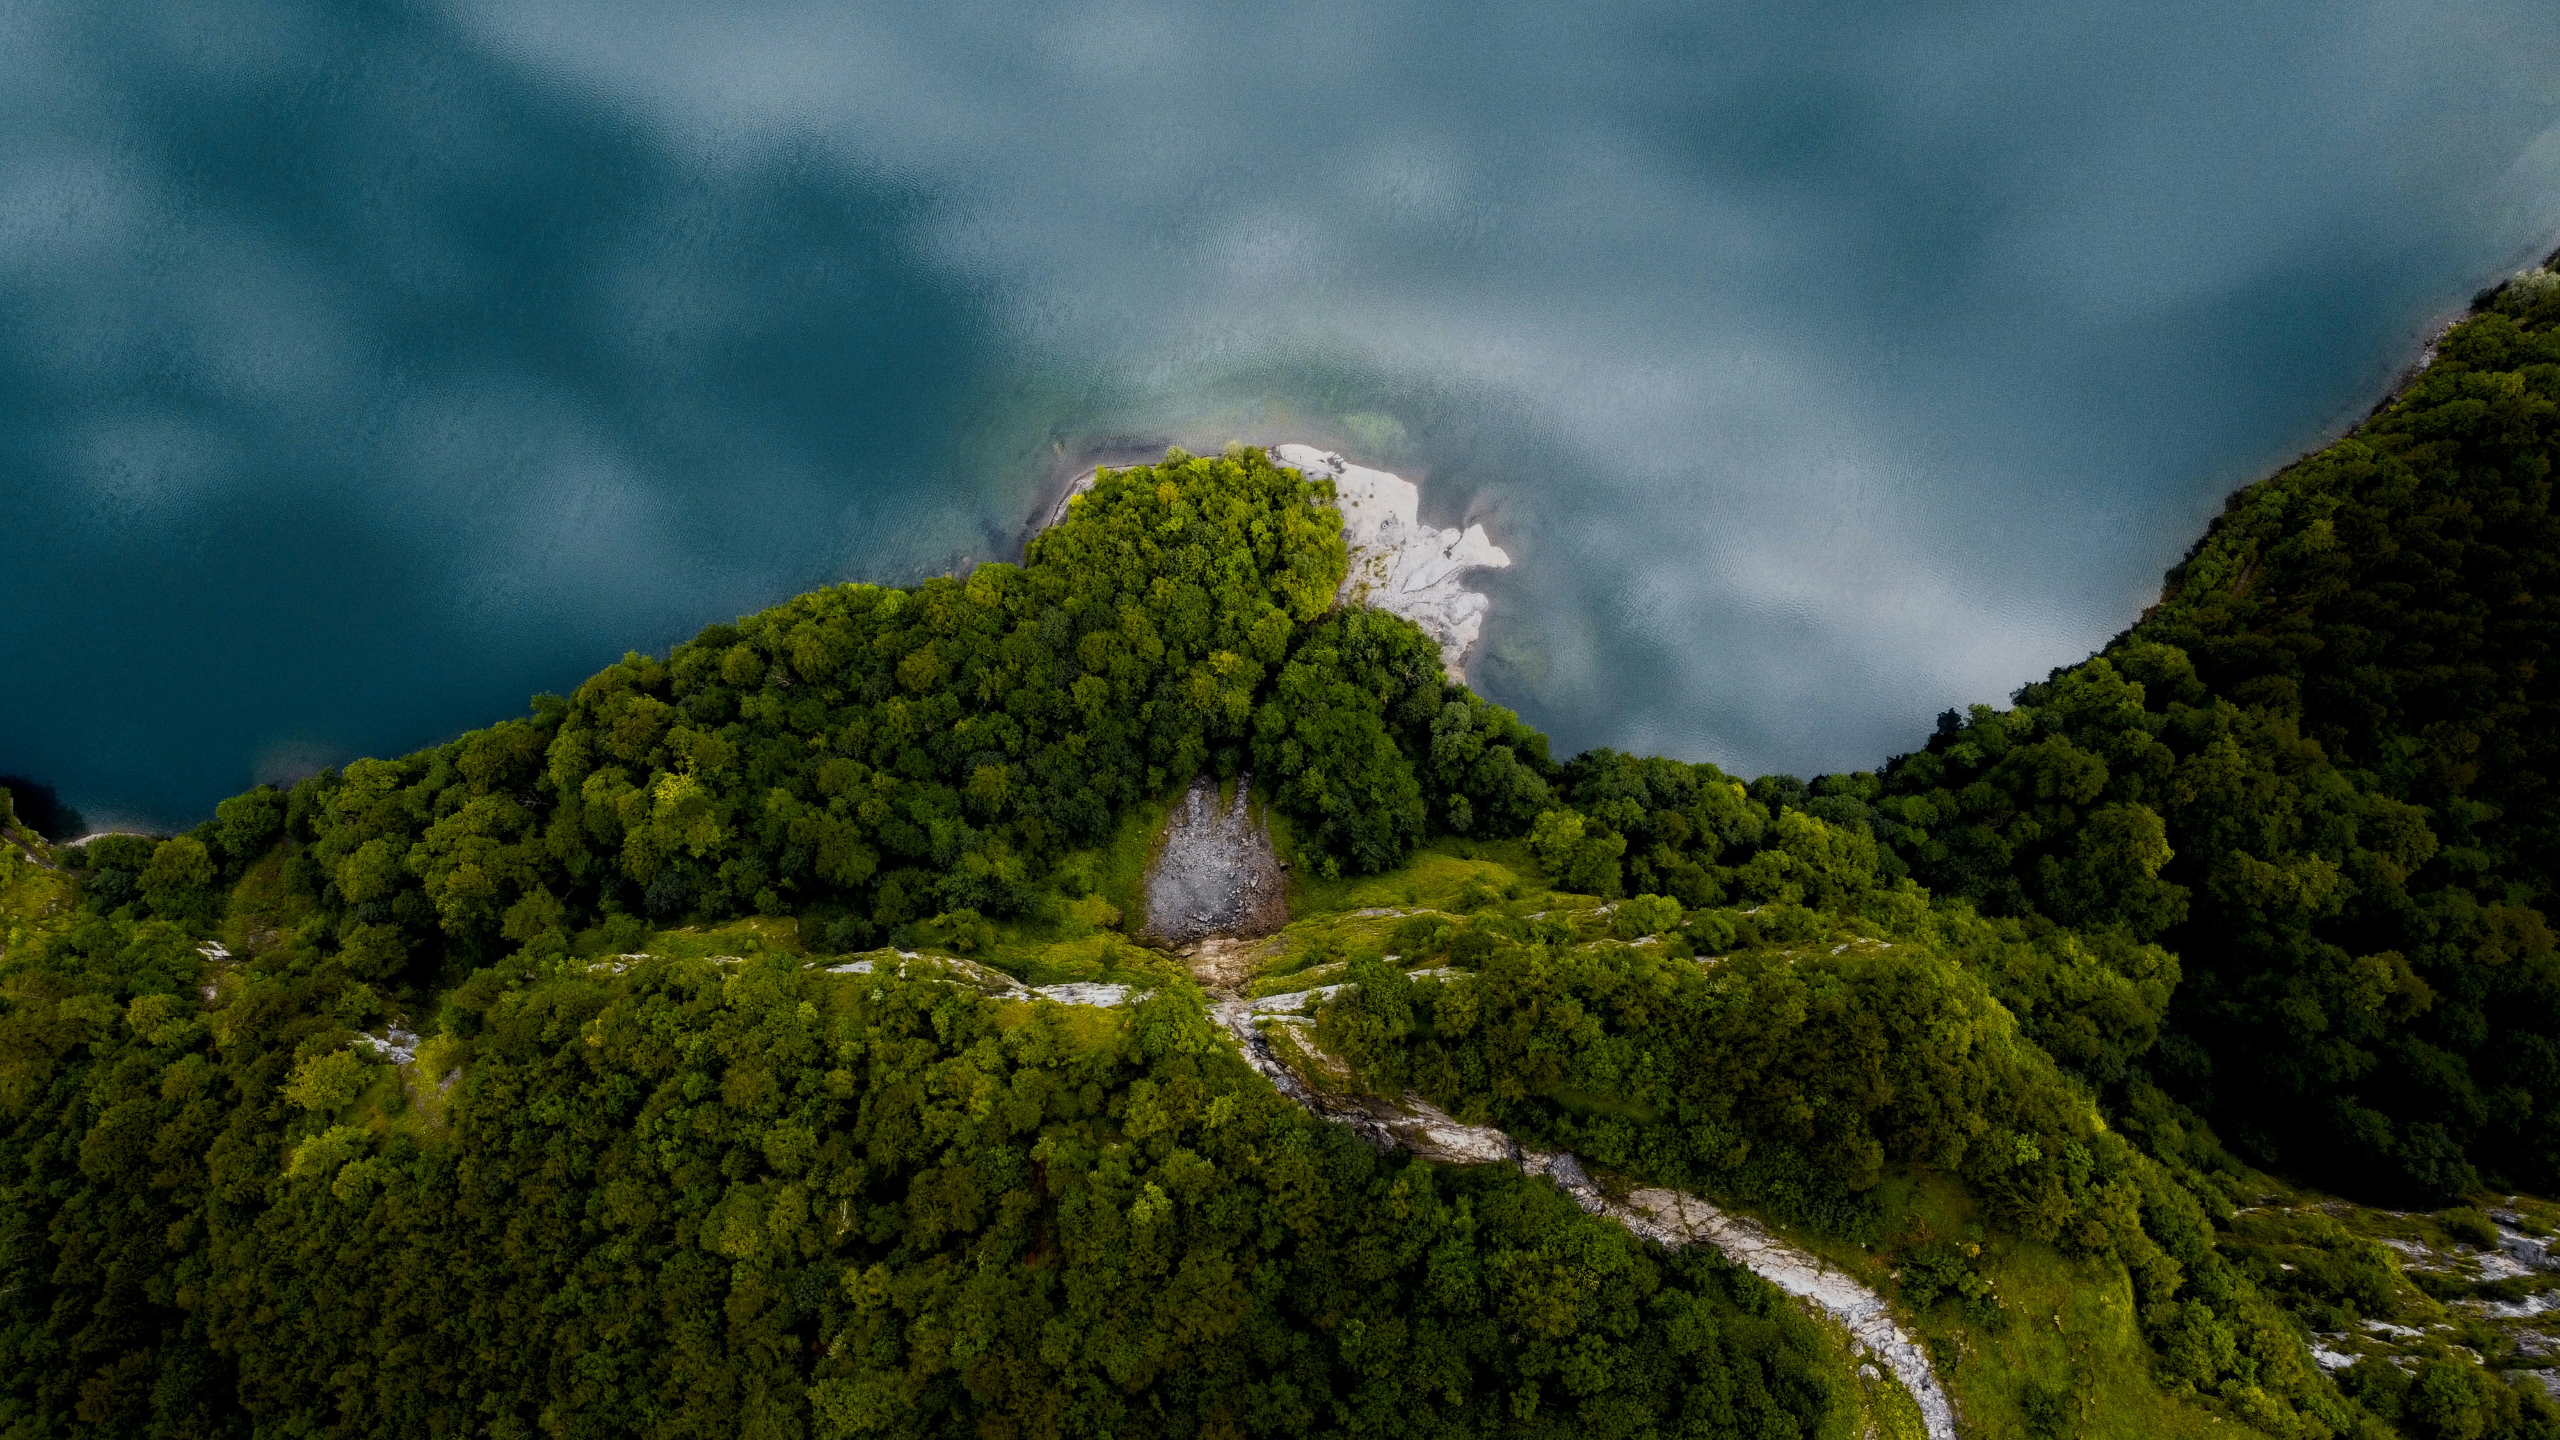 General 2560x1440 nature landscape trees forest water water ripples drone photo aerial view lake Klöntalersee Switzerland Kodex1213